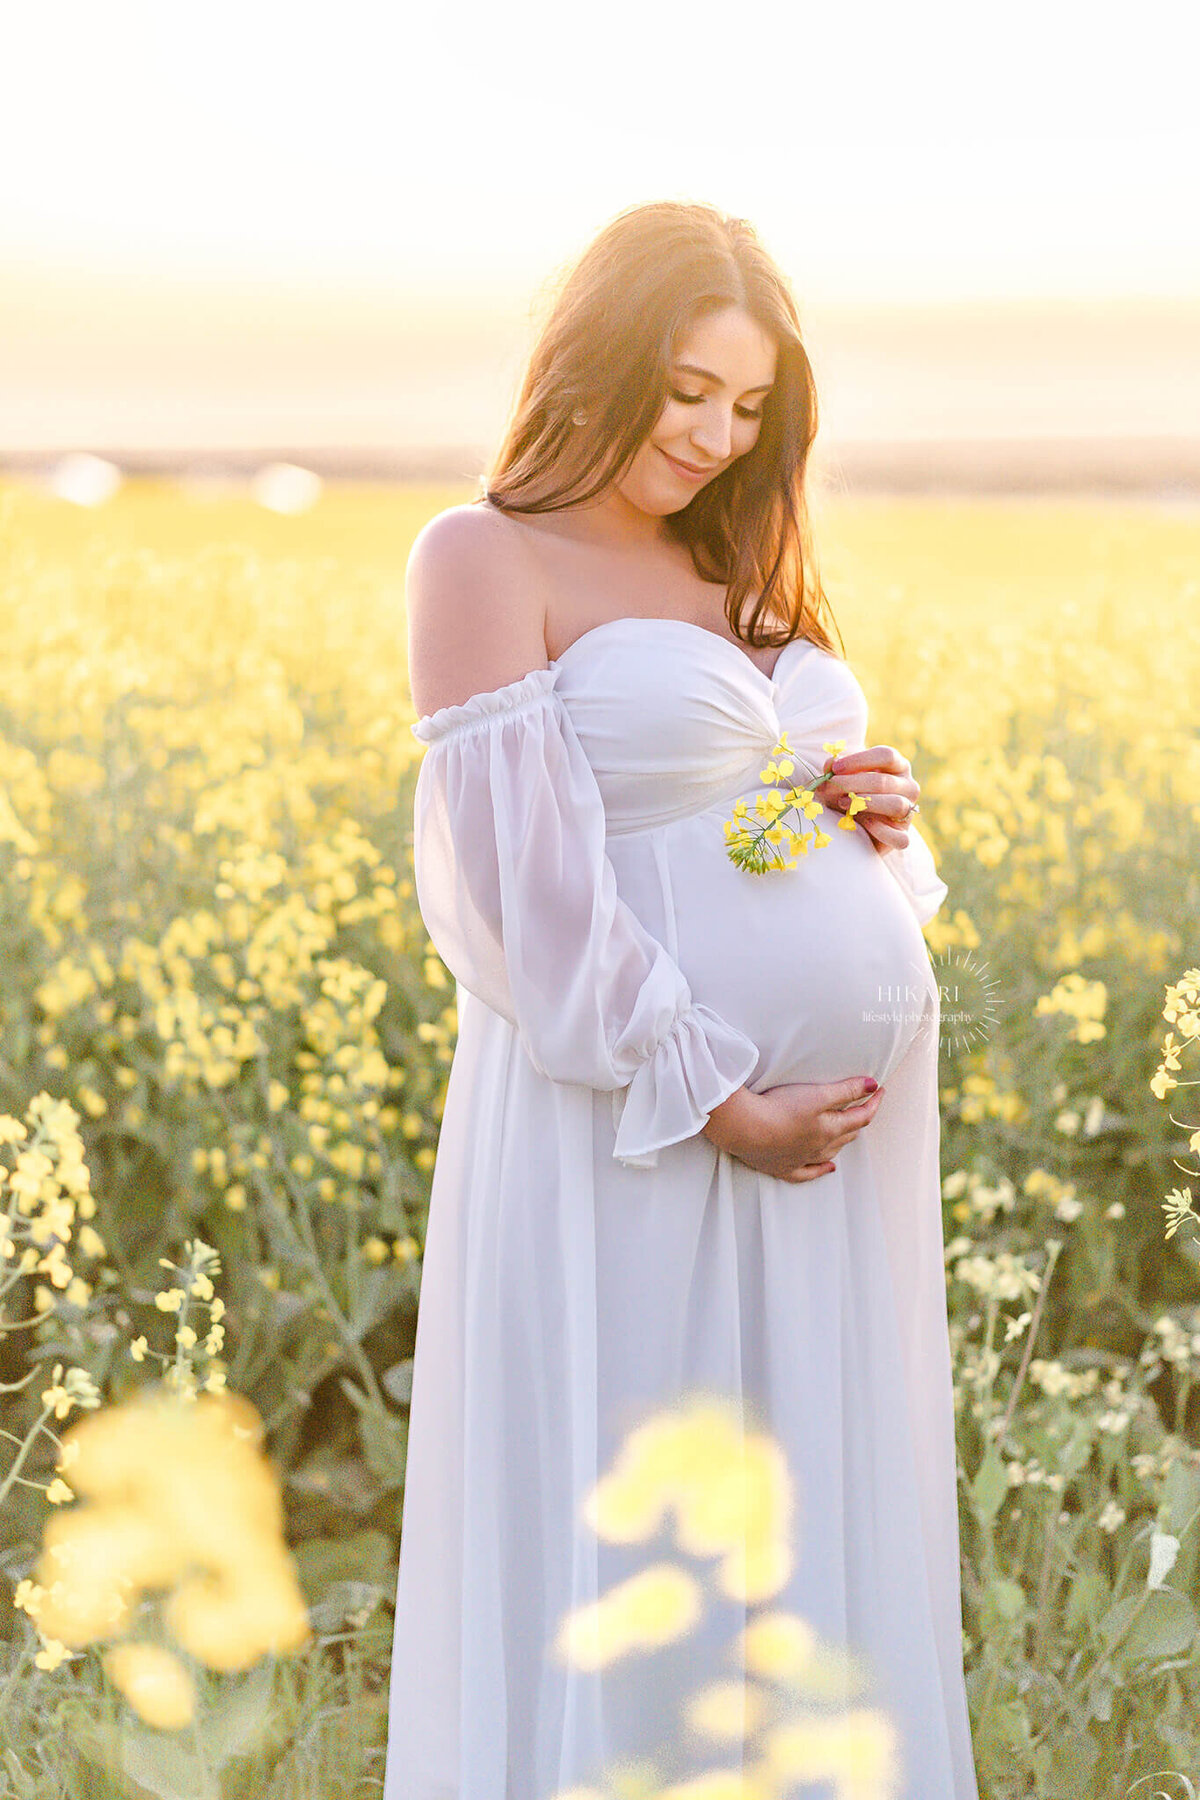 pretty girl holding a little canola flower against belly bump in yellow flower field during golden hours maternity session in SA